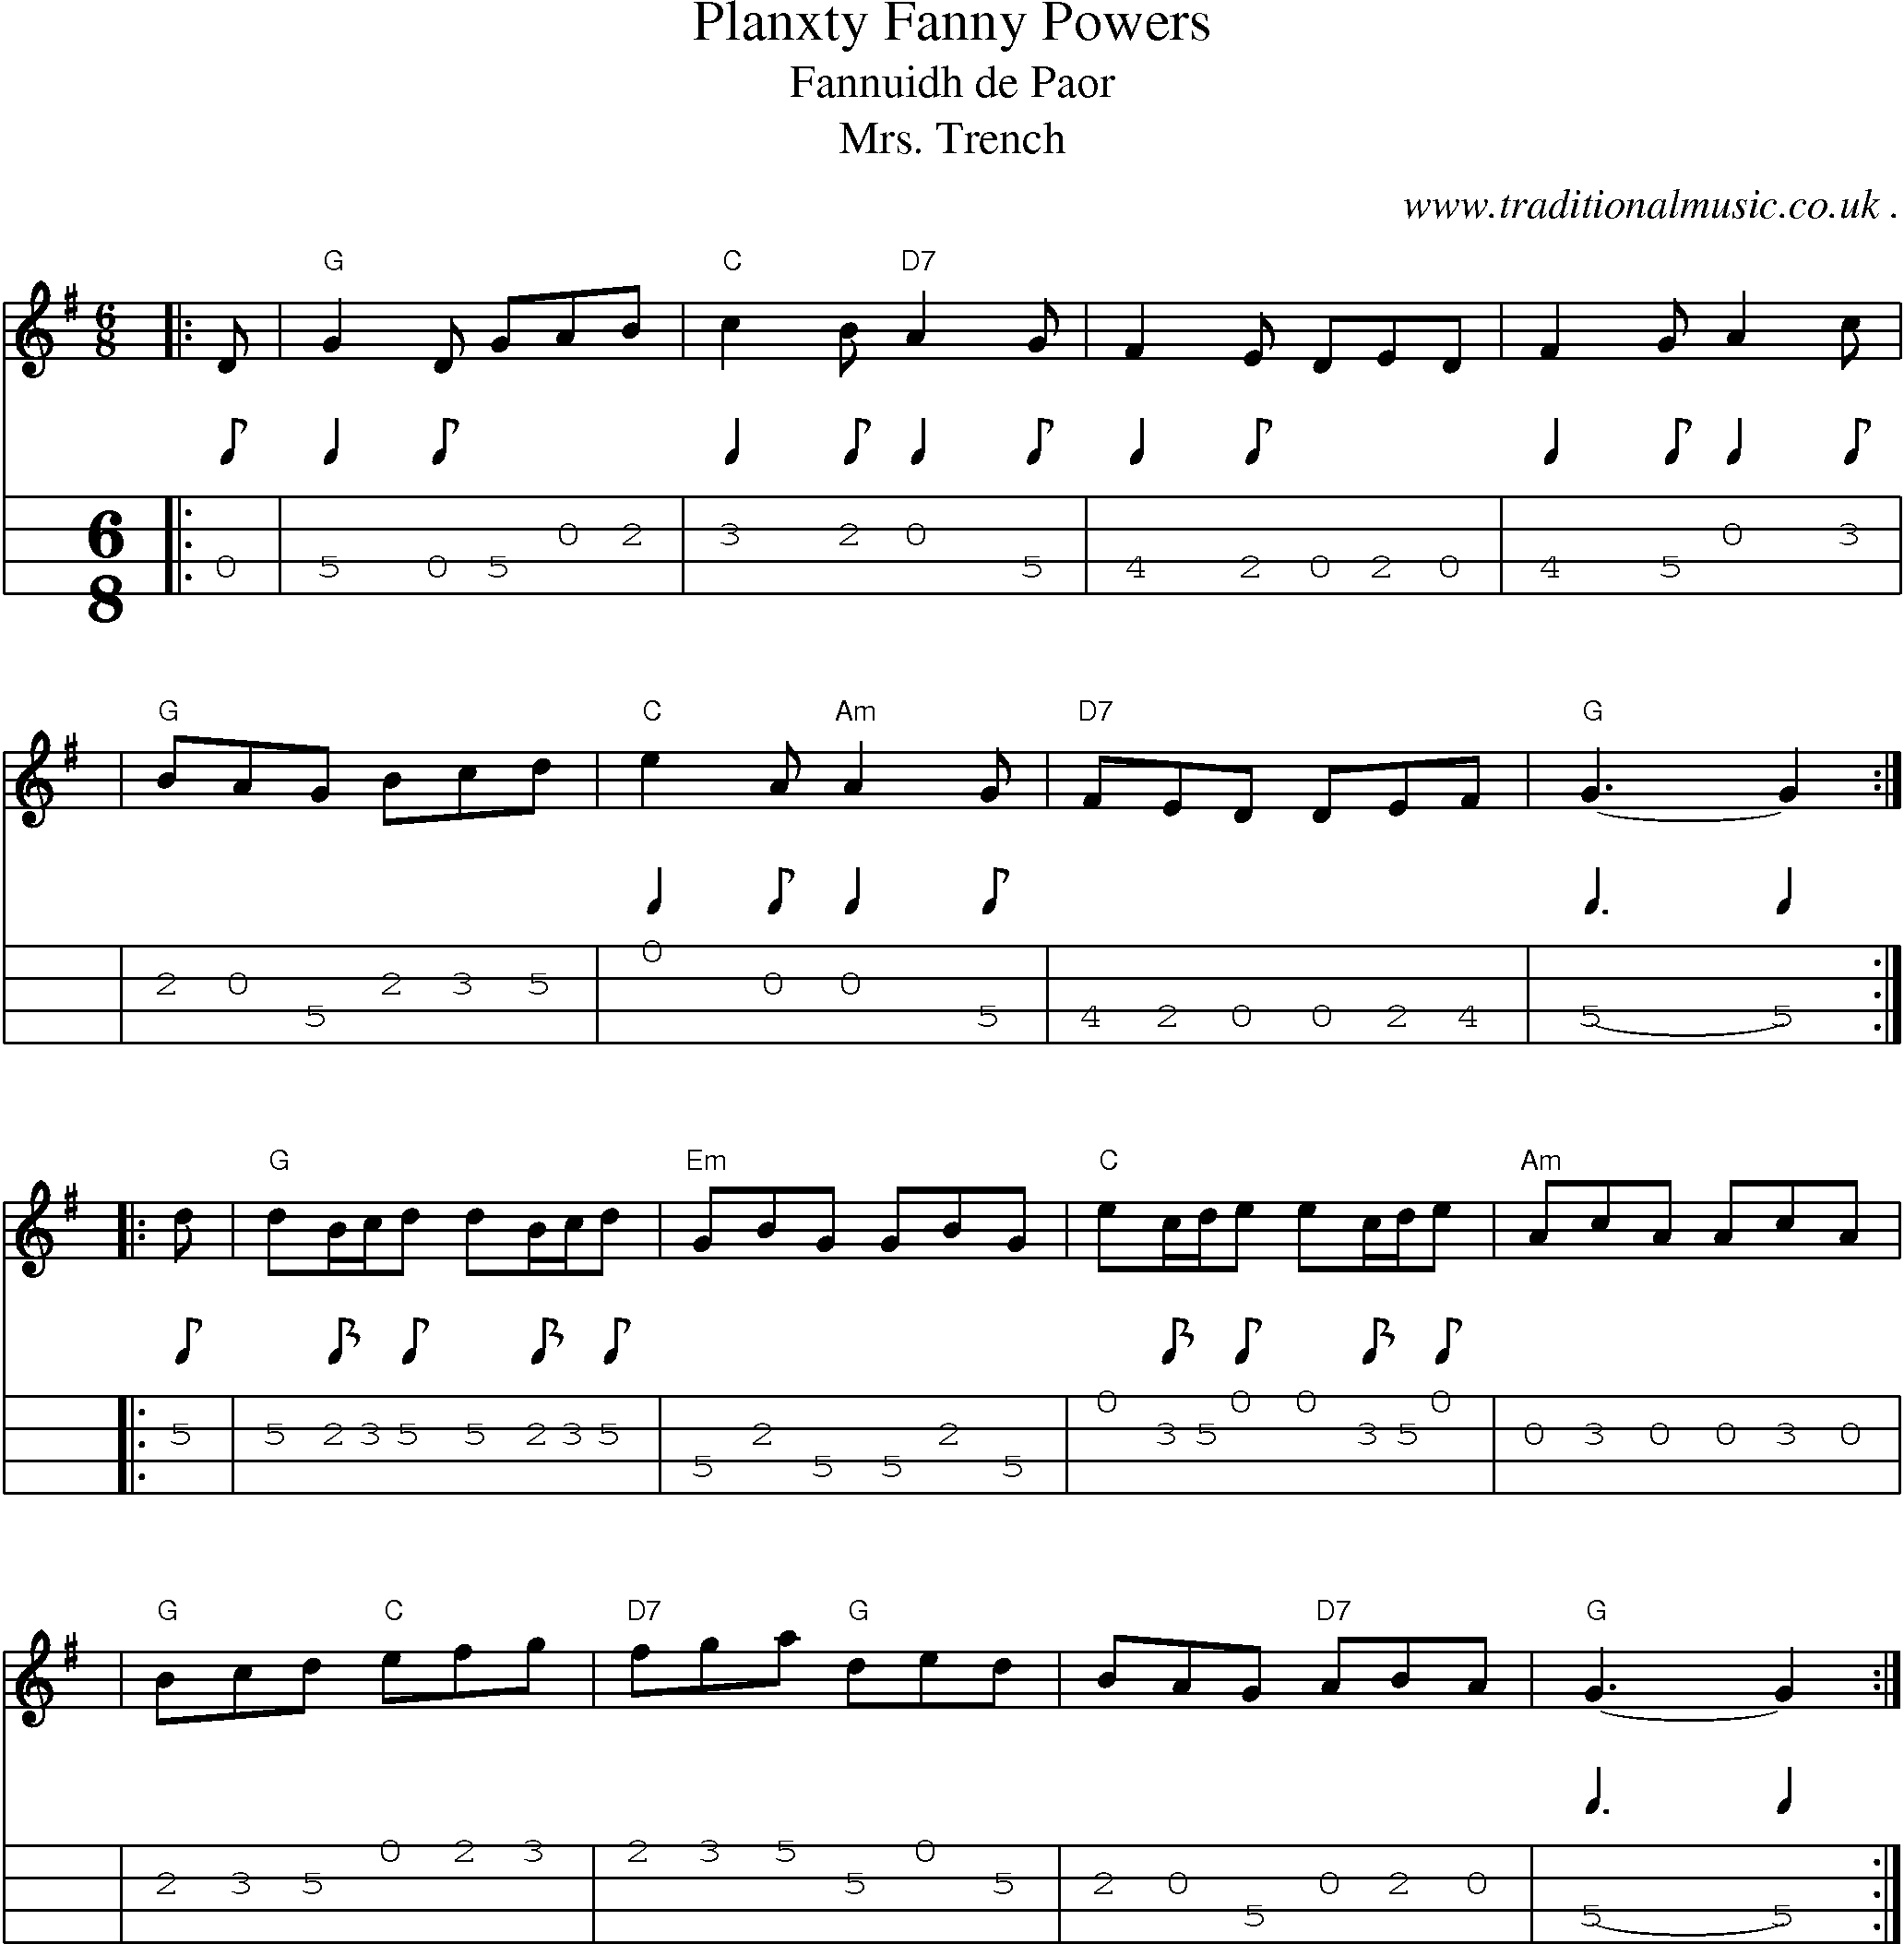 Sheet-music  score, Chords and Mandolin Tabs for Planxty Fanny Powers